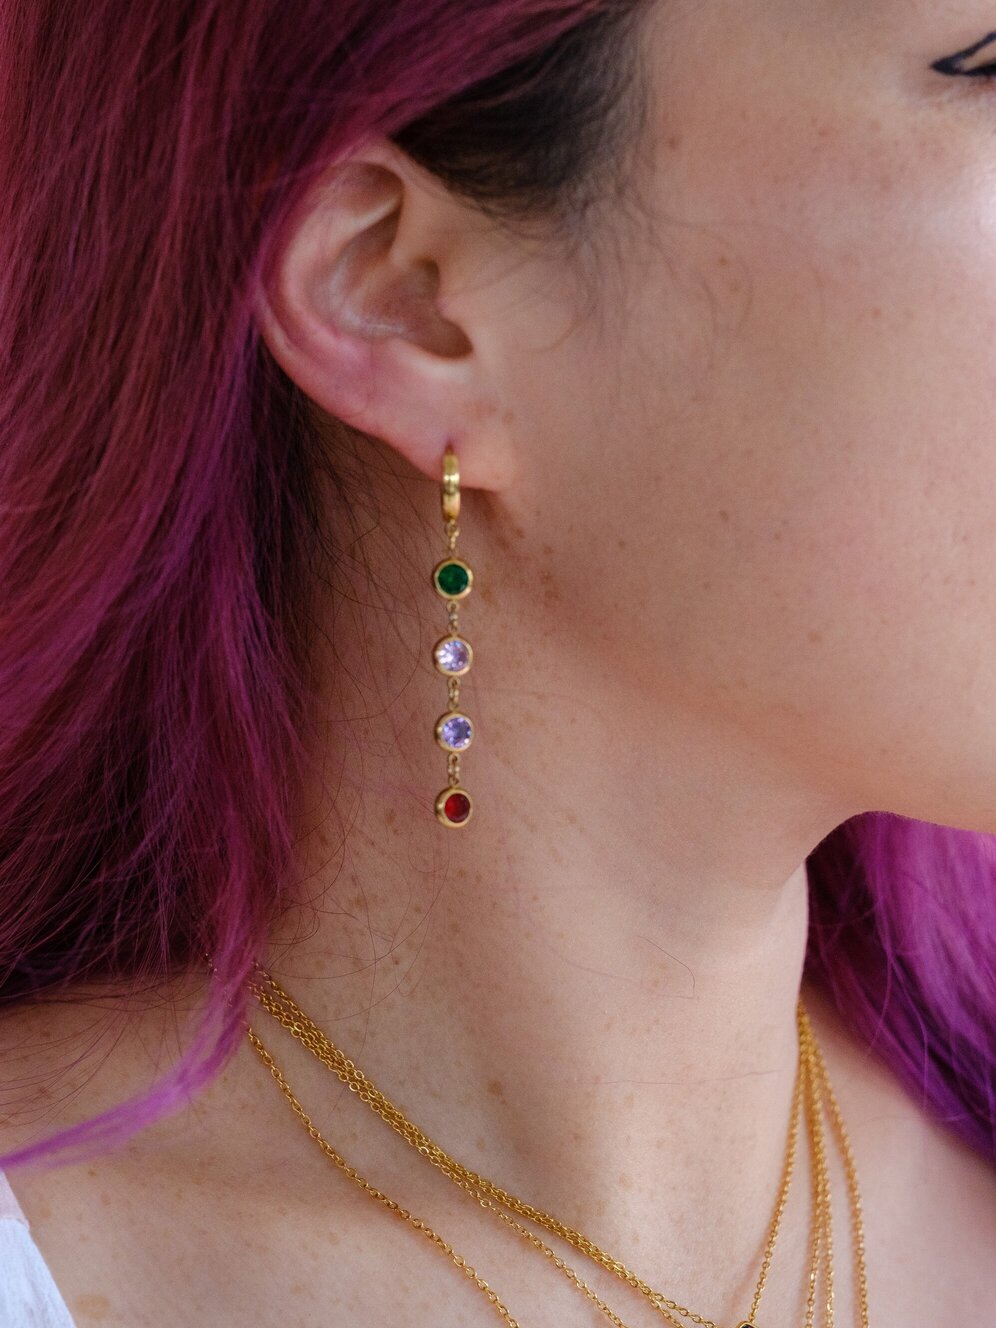 A woman wears a huggy hoop with dangling round gems set with green, pink, purple and red stones